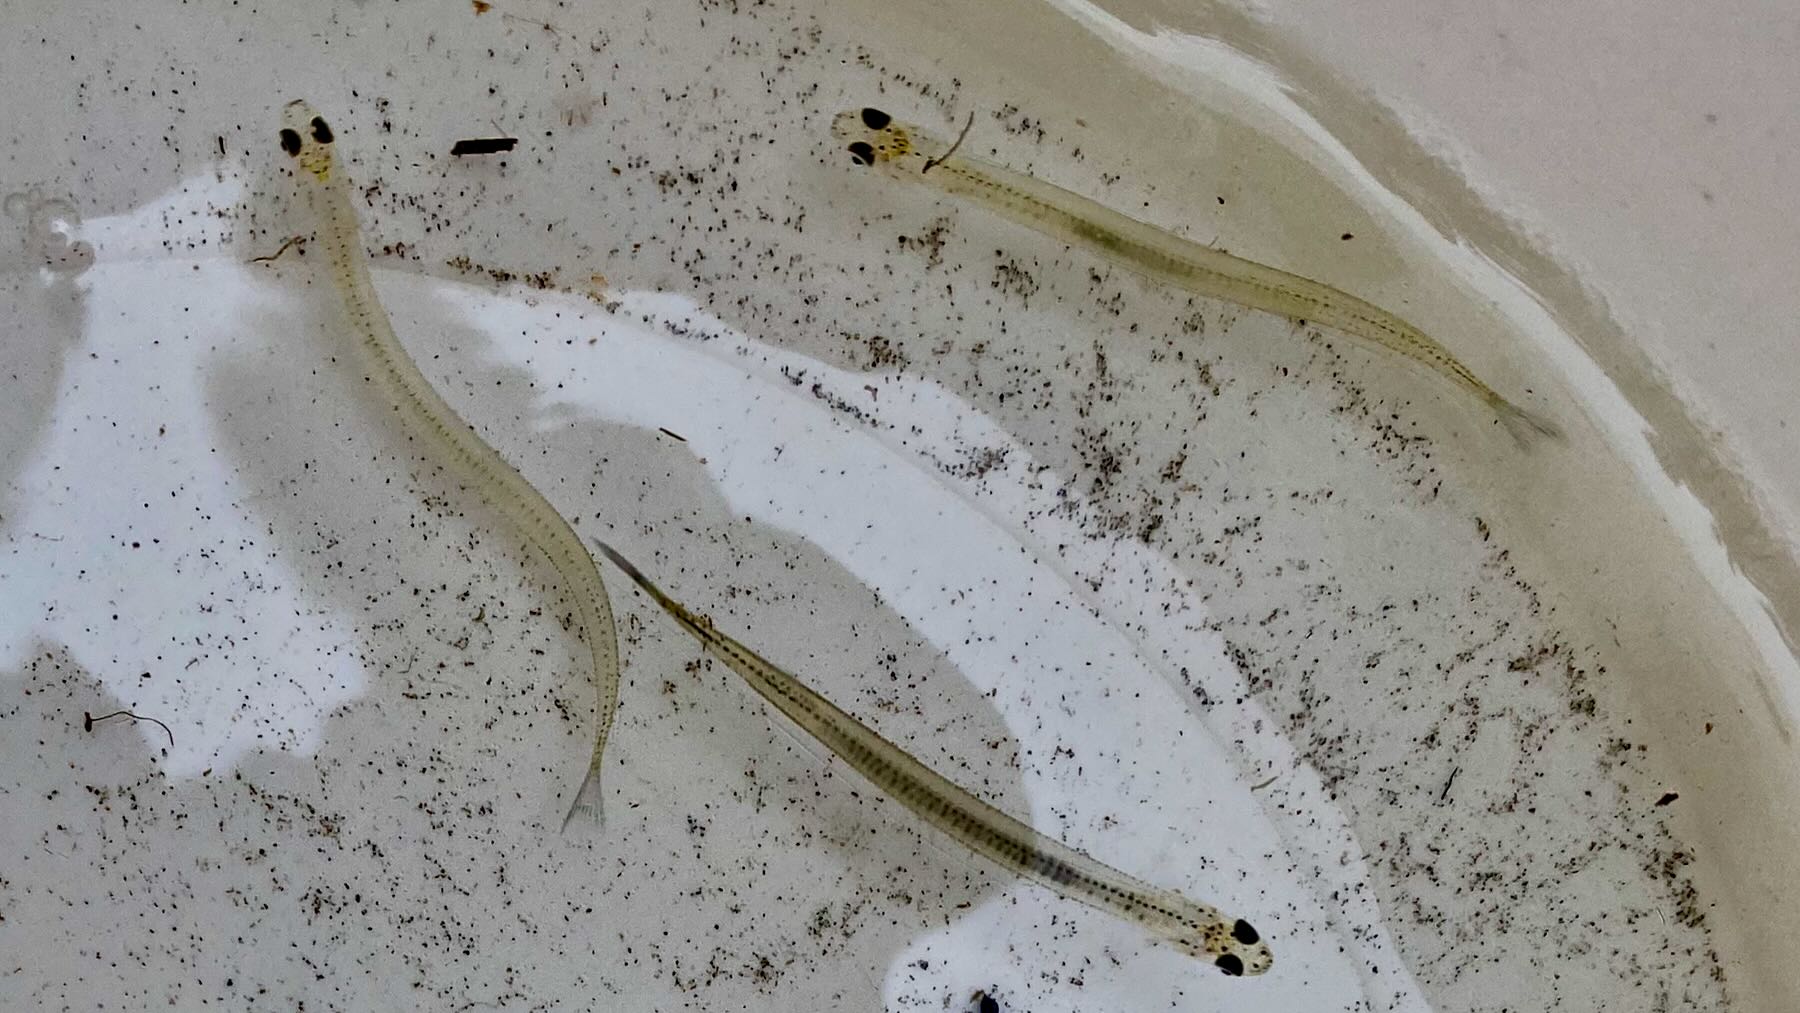 Long thin transparent creatures with prominent black eyes, swimming in a bucket of water. 